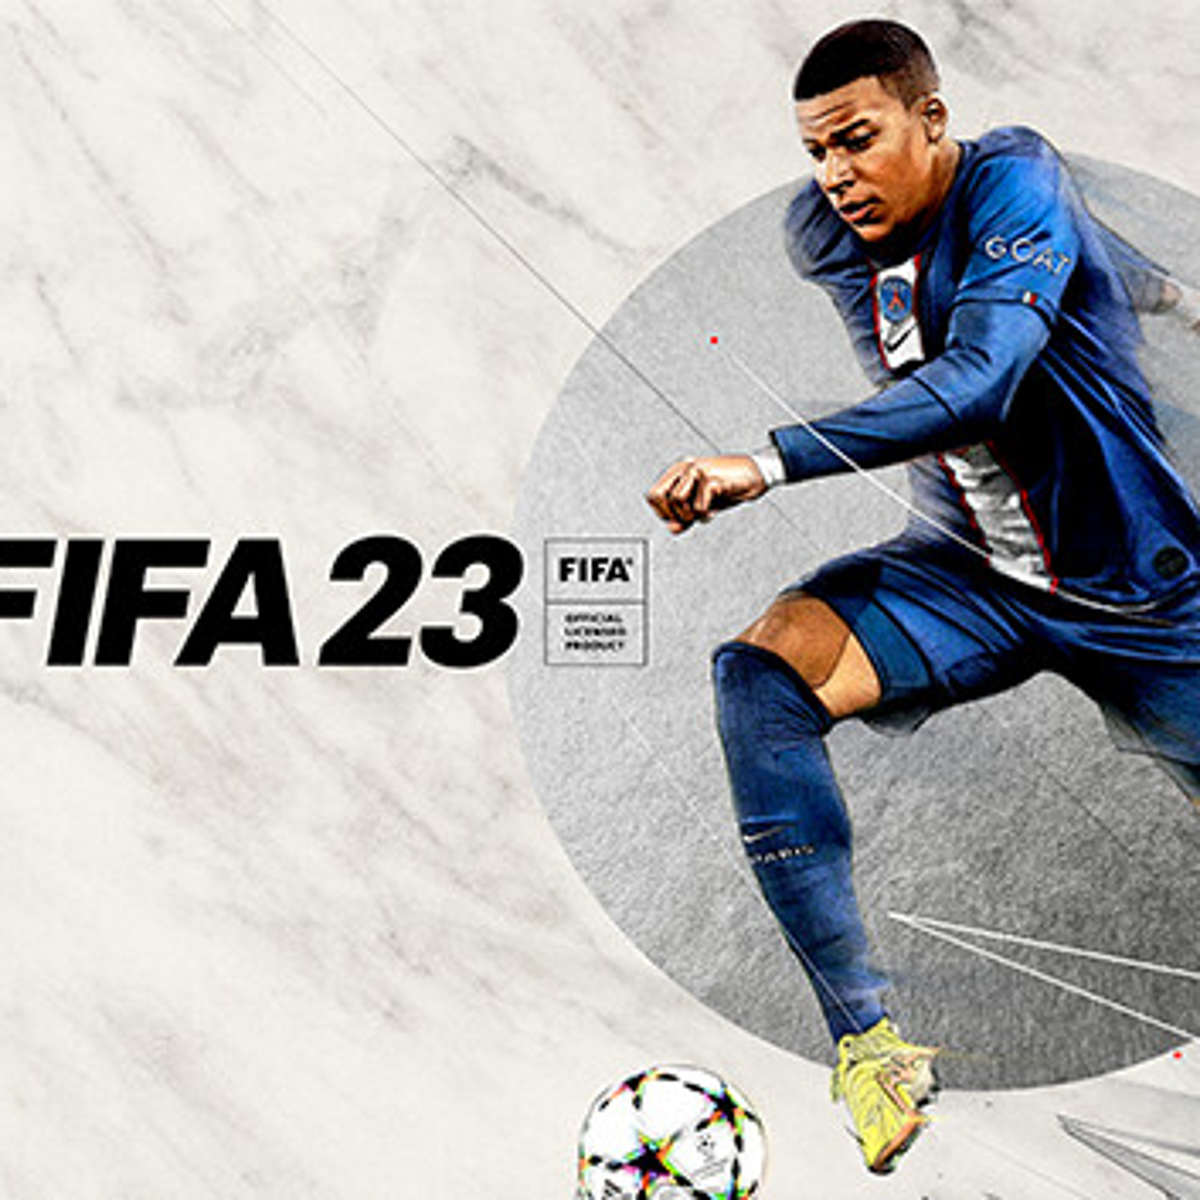 FIFA 23 sales up 6% compared with FIFA 22, European Monthly Charts